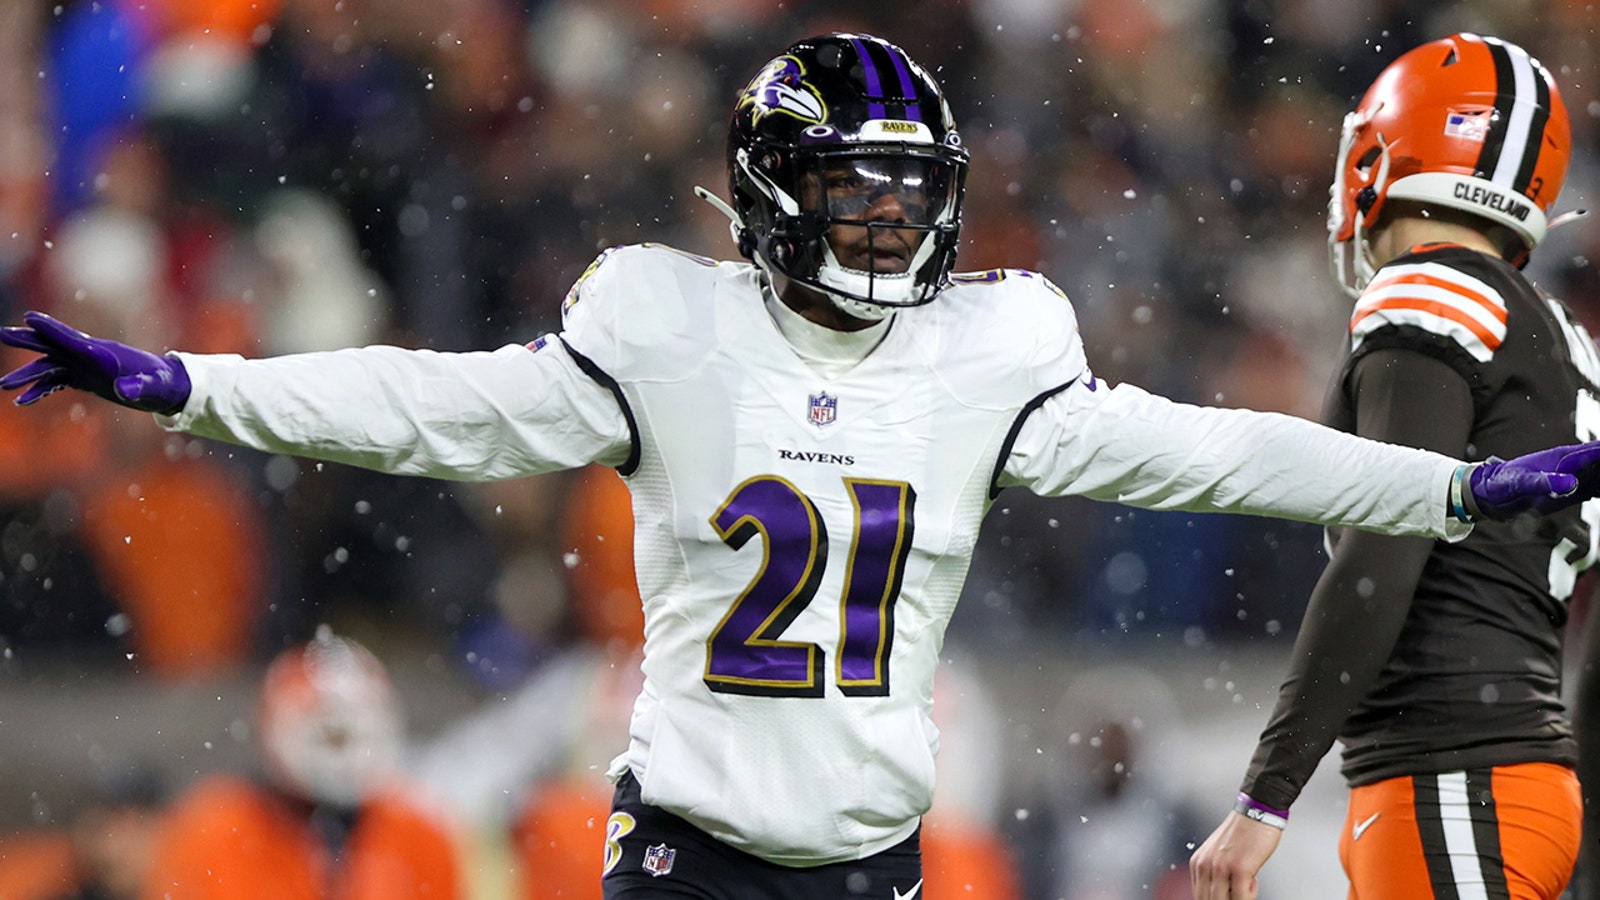 NFL Week 16: Should you take Raven this weekend against the Falcons?